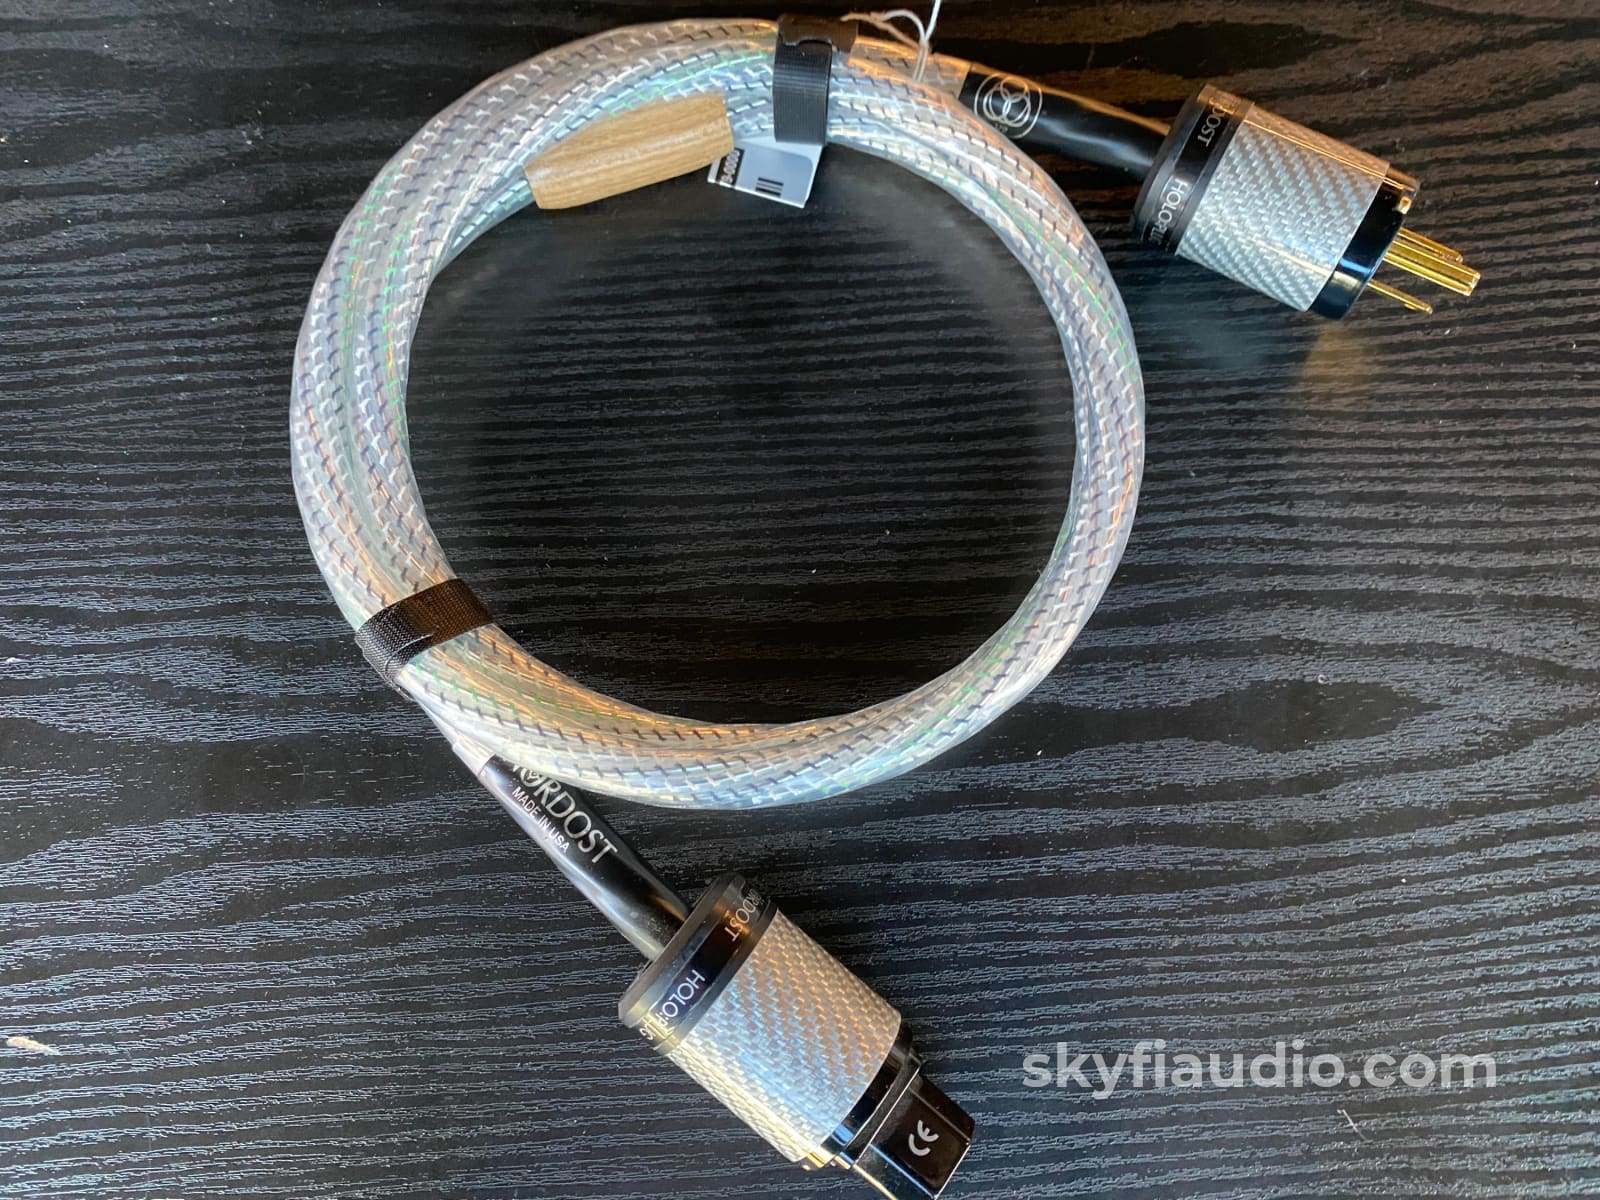 Nordost Valhalla 2 Power Cable - 20 Amp Iec 2M Cables